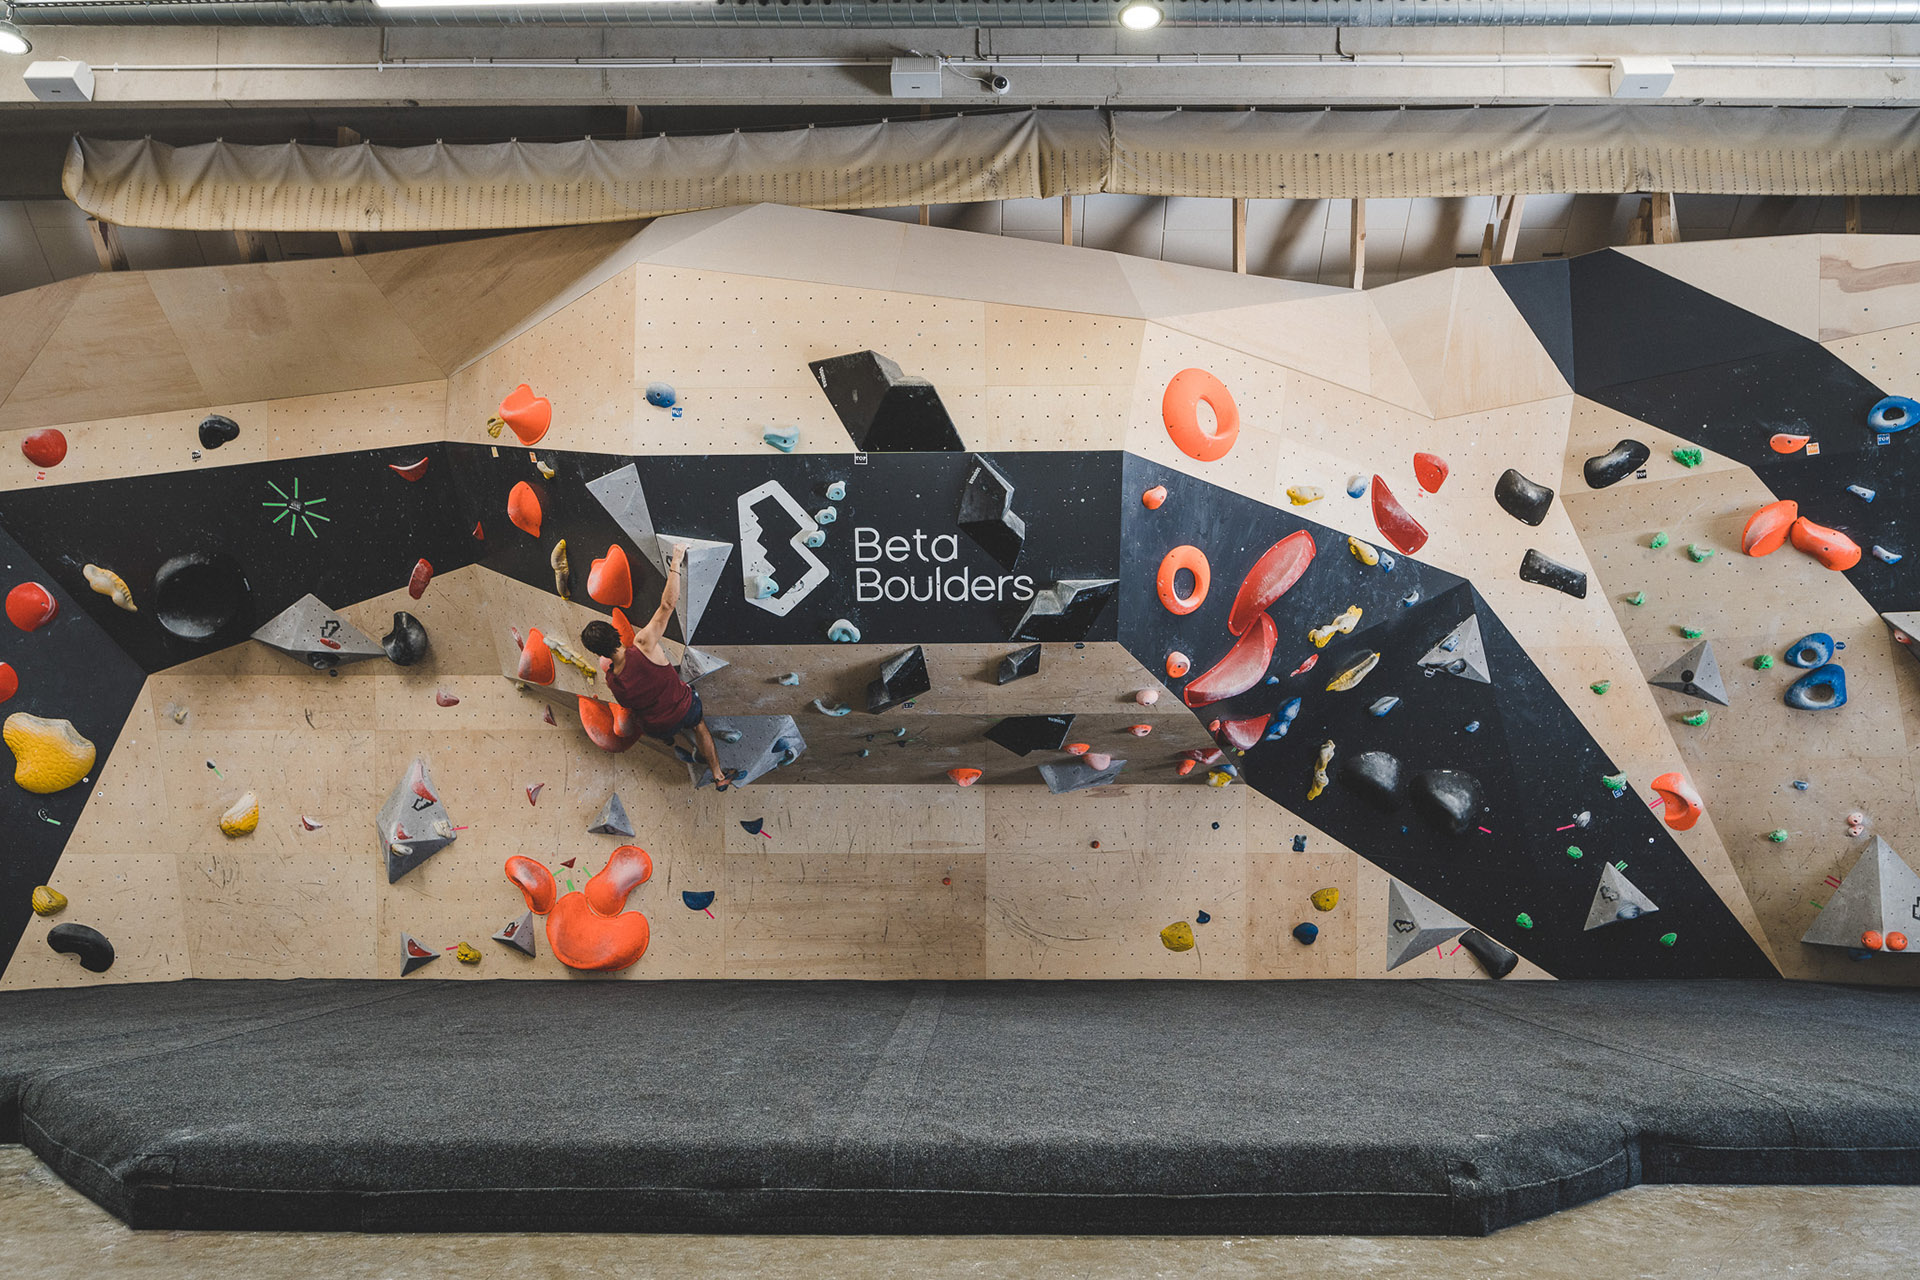 Renovation of a gym in Copenhagen with the Beta Boulders concept, providing a sports life in a pleasant atmosphere